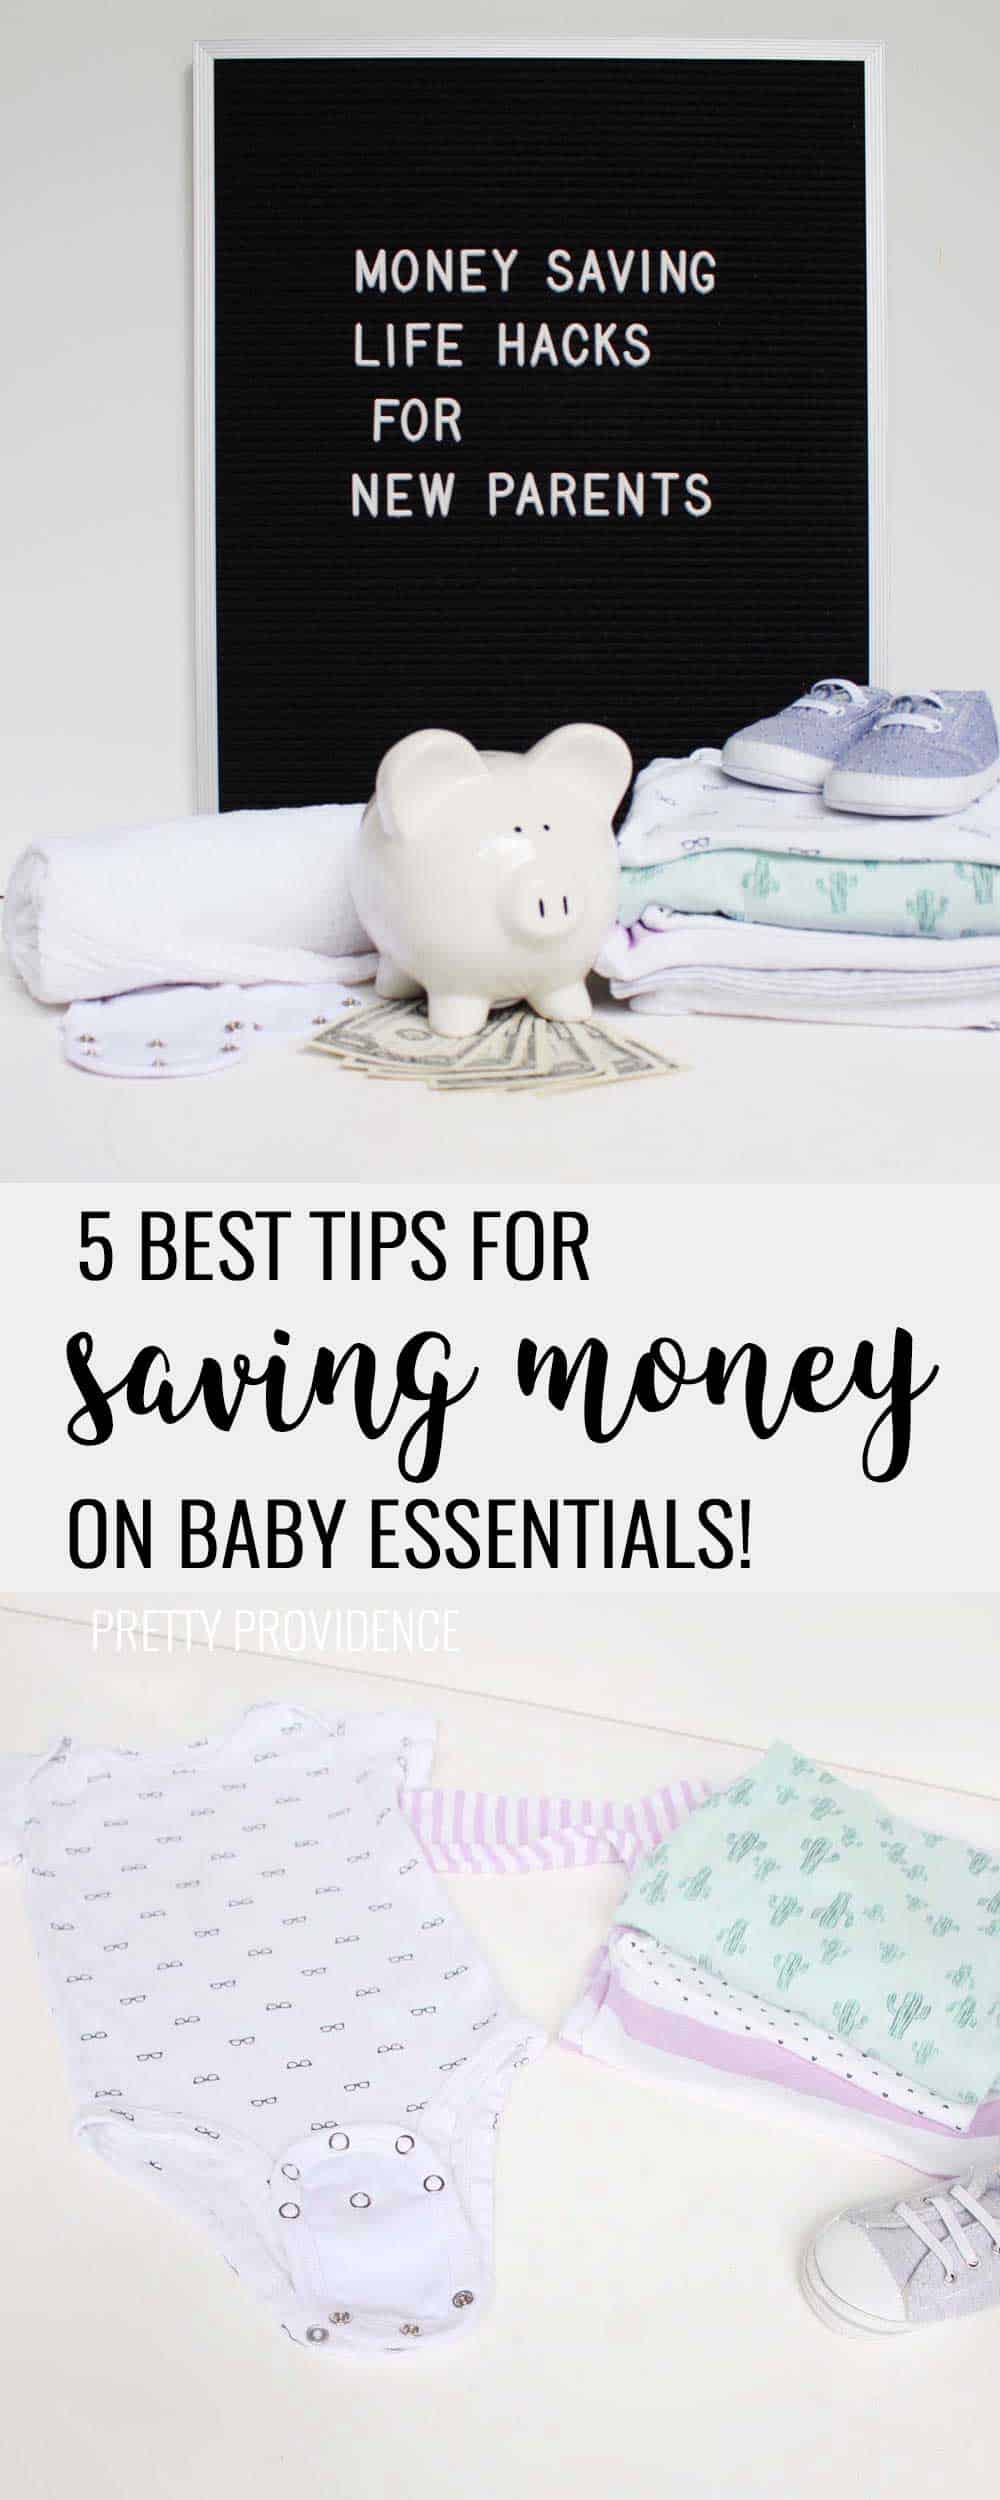 Okay everyone needs to know these! Baby stuff can get expensive but there are ways to save lots of money on certain things!! 